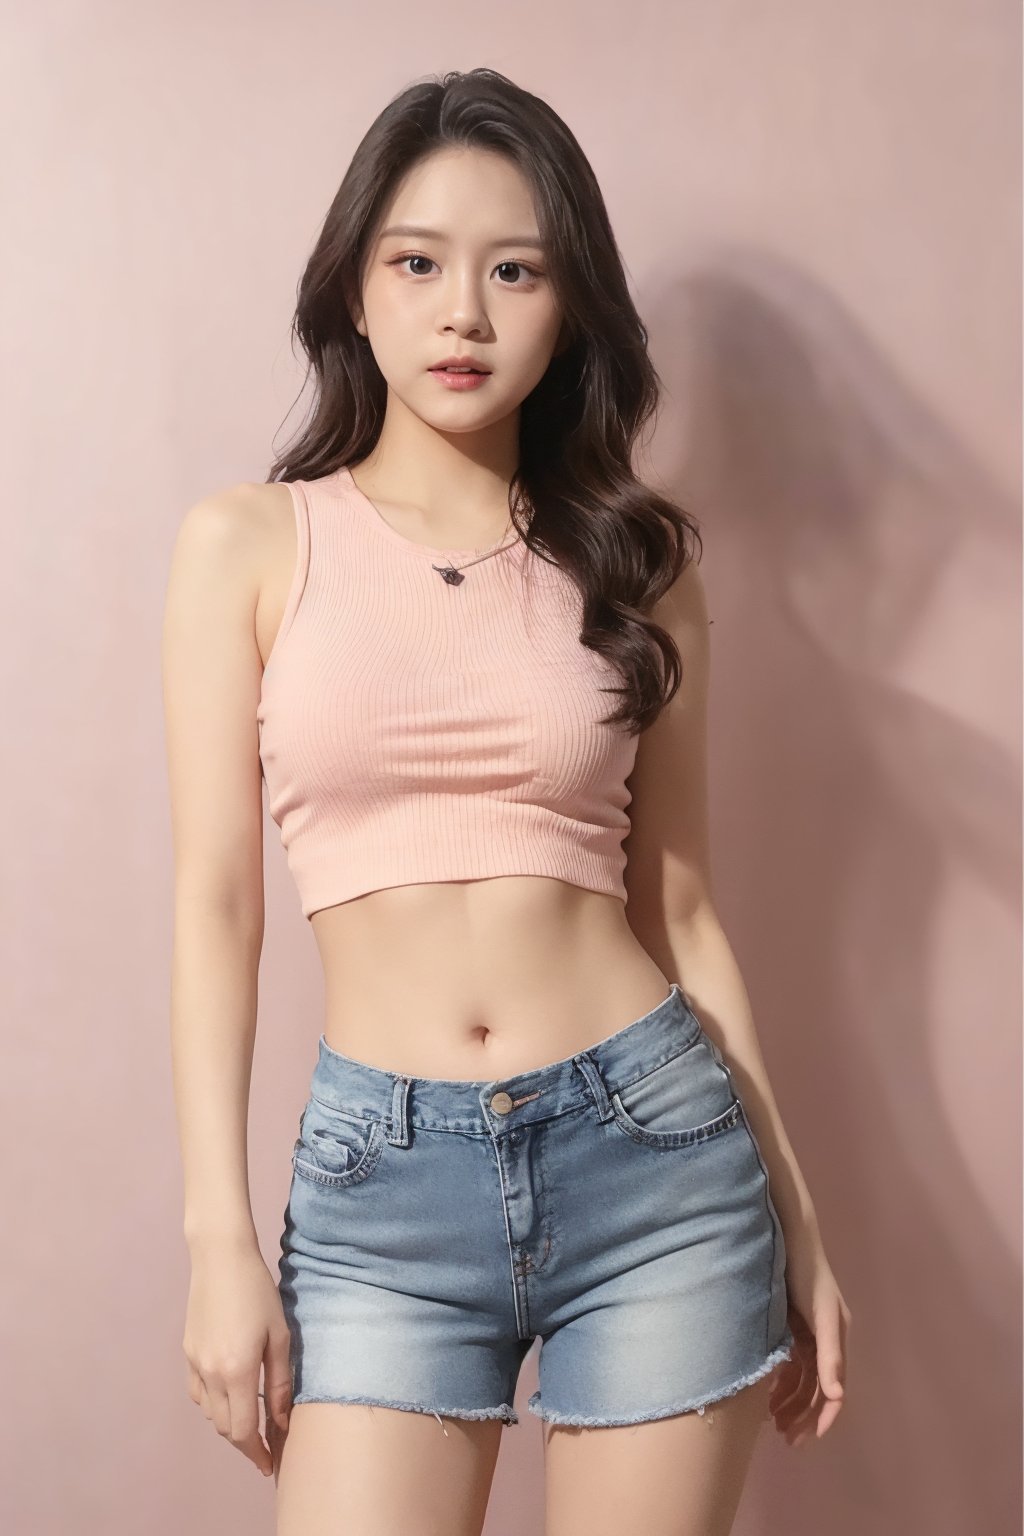 1woman, Masterpiece, Best Quality, Blank Pink Background, Crop Top, Jeans Short Pants, ChristyJKT48, Natural Light, Shadow, Make Up, Standing Pose, 